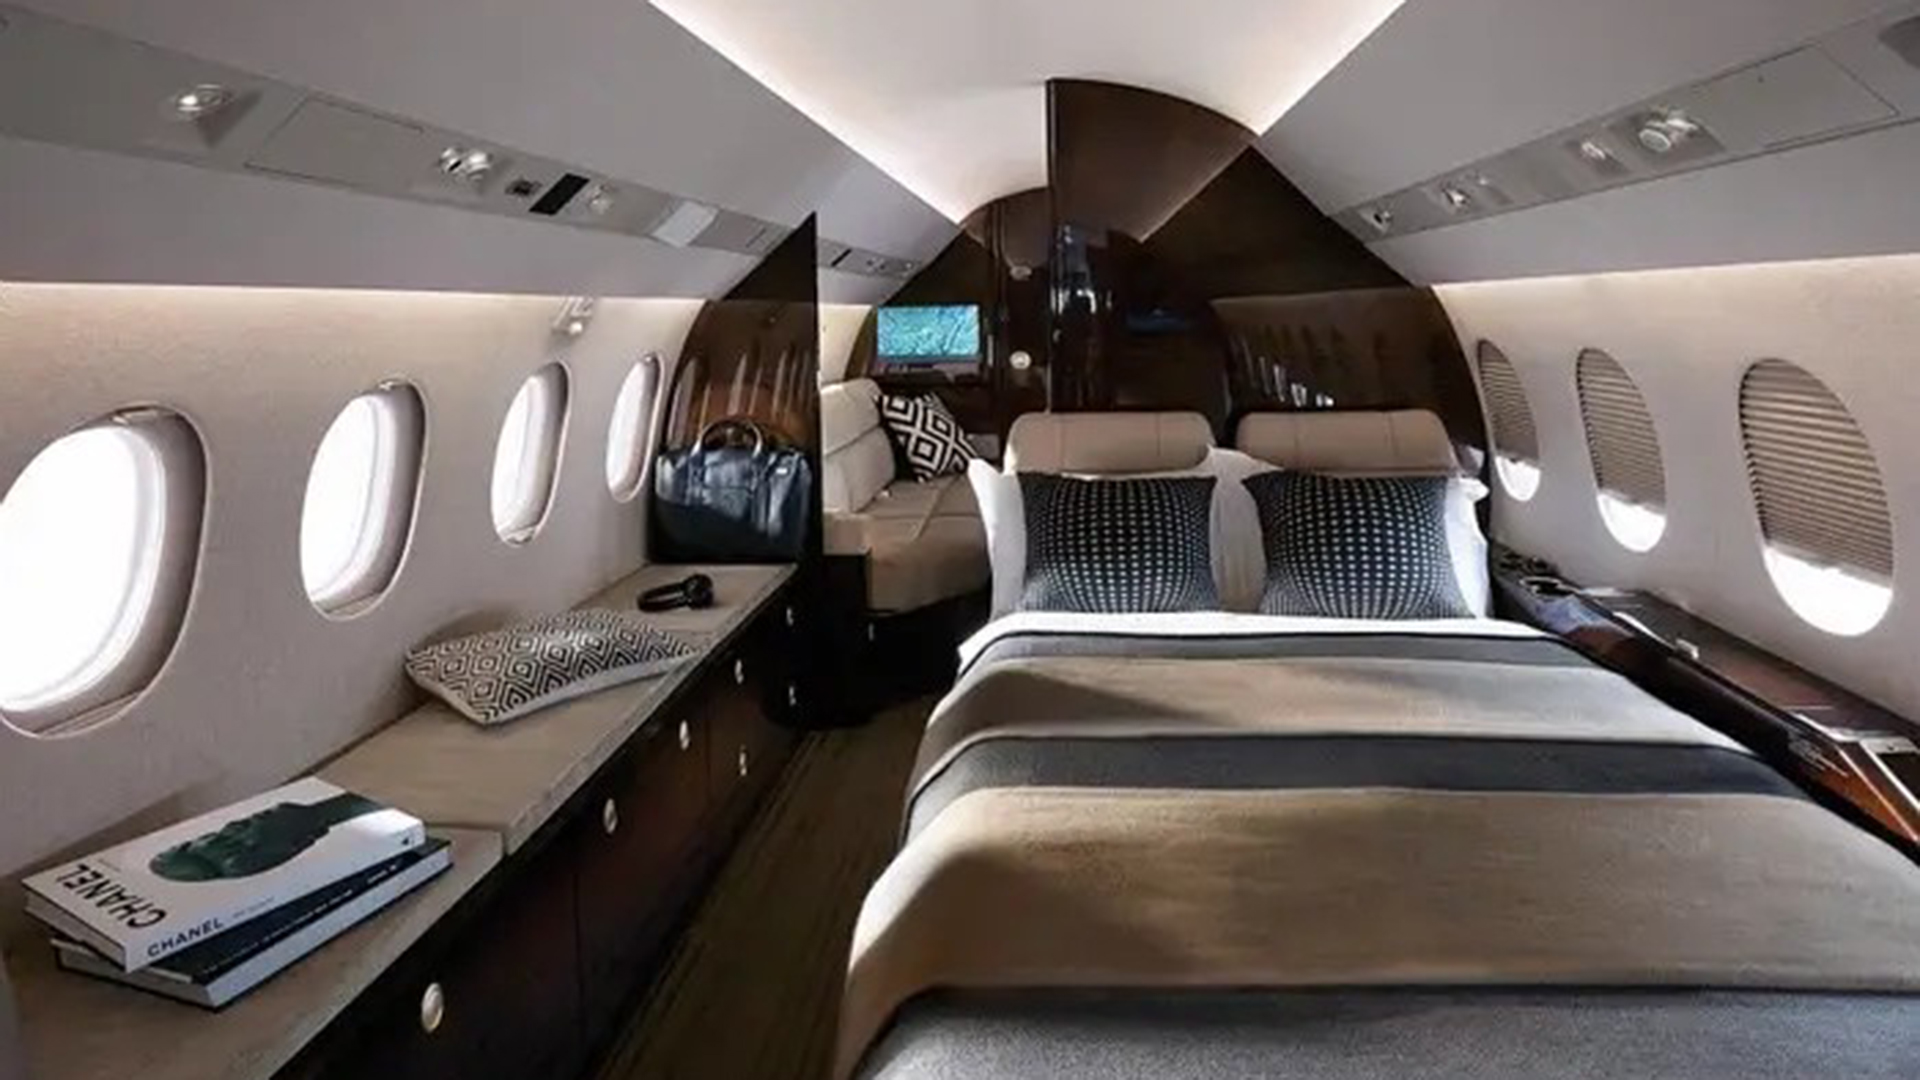 The Falcon 900 allows the rear to be configured as a private room for two people.  (https://www.dassault-aviation.com/)